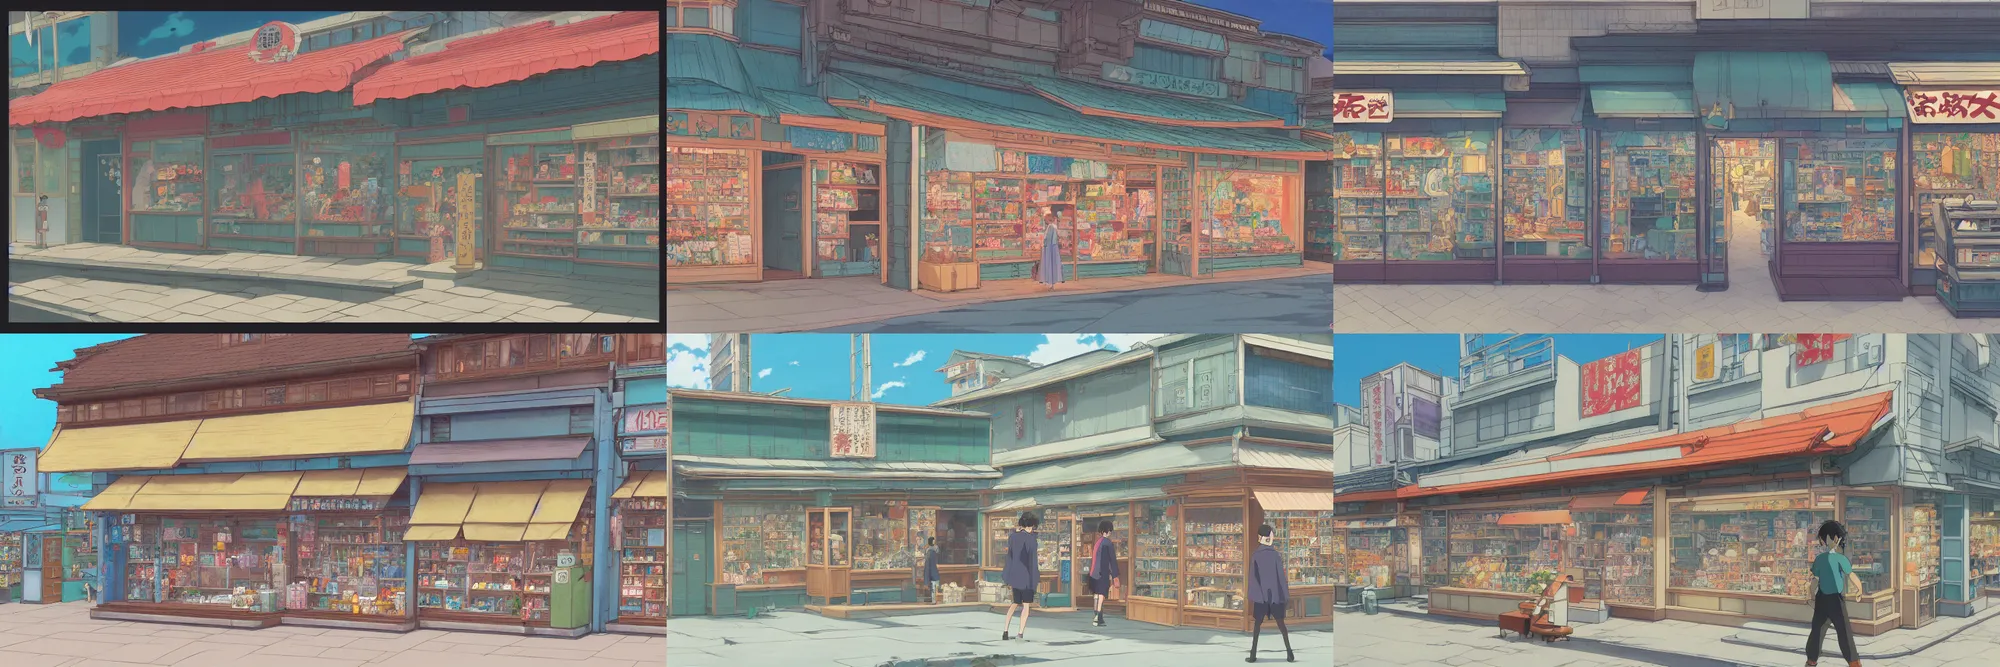 KREA - front view of a closed japanese storefront in the beautiful anime  film by makoto shinkai and studio ghibli, from the anime film Kimi No Na Wa